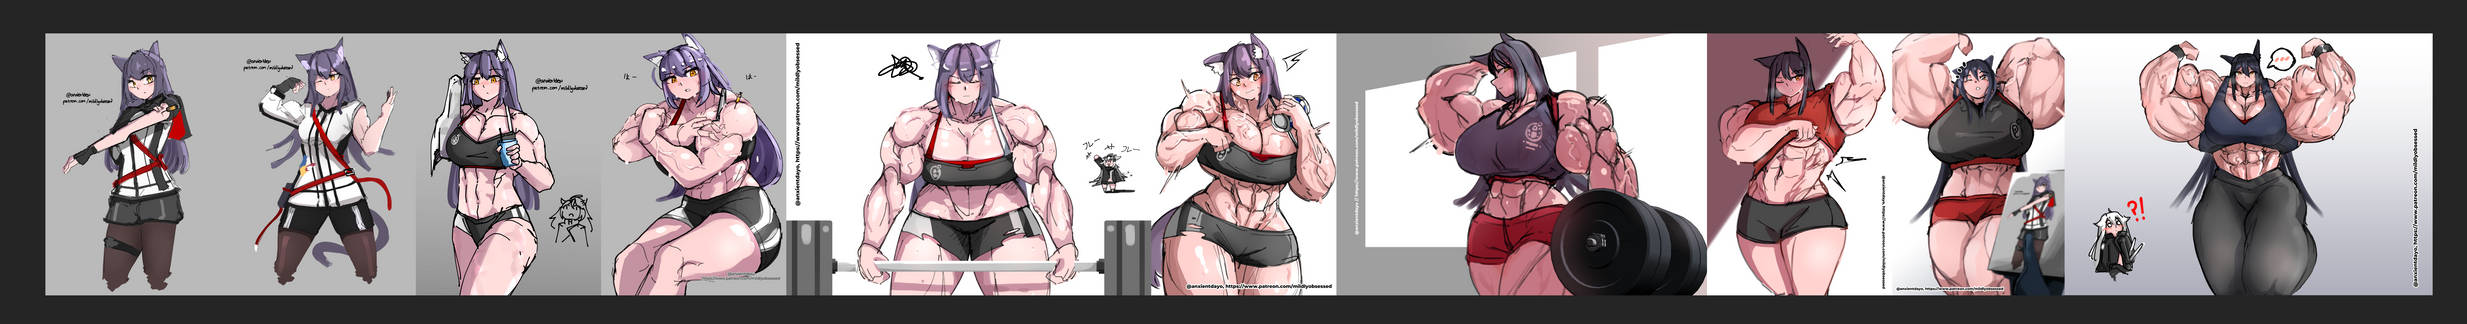 [Arknights FMG] Texas Muscle Growth